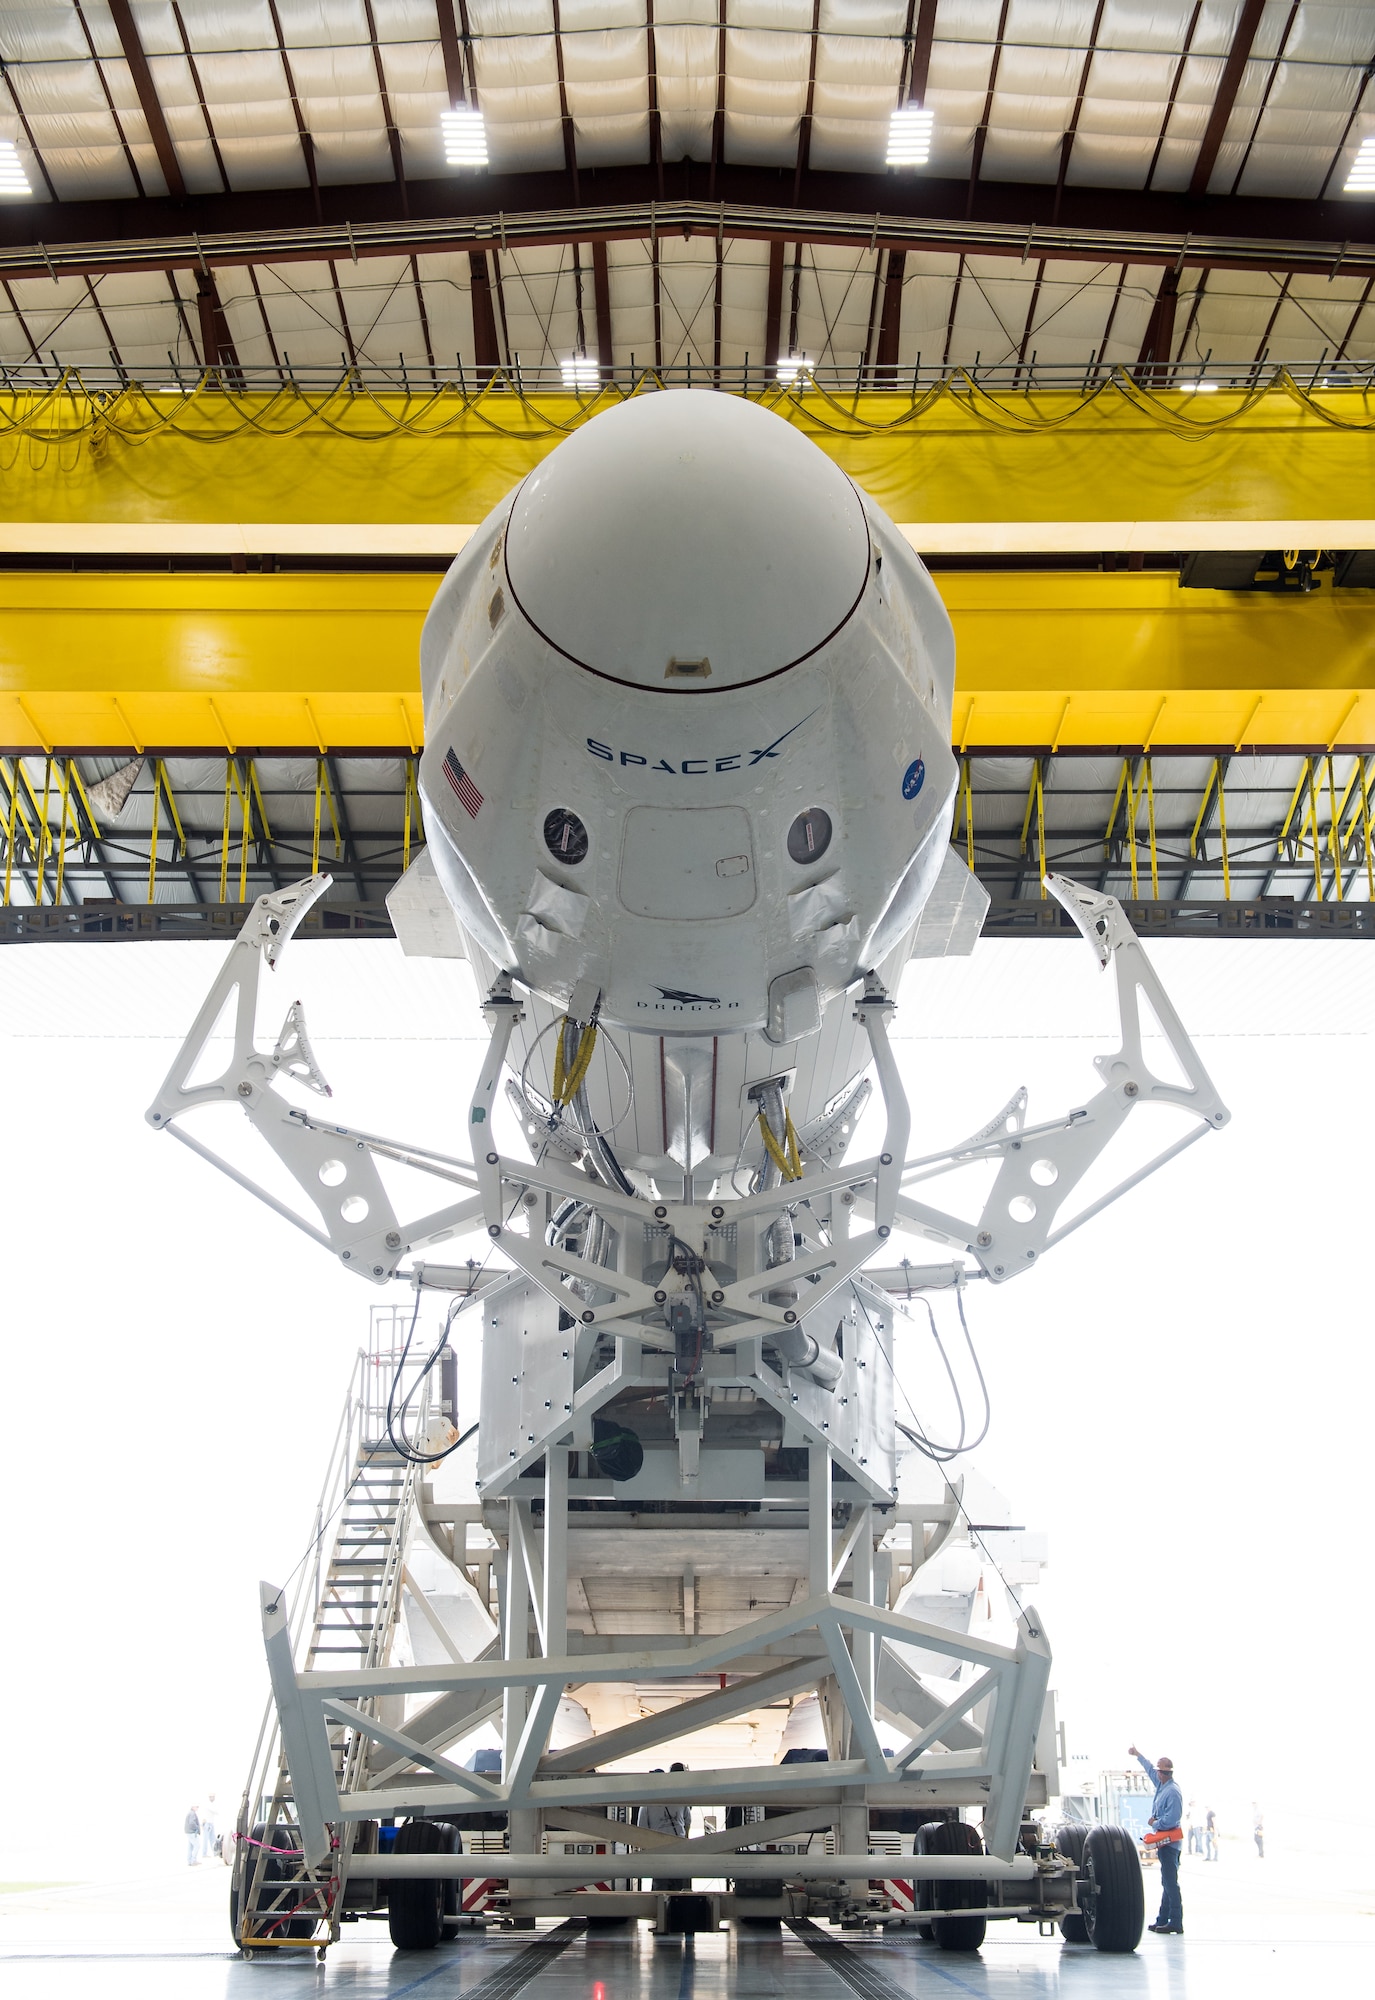 A SpaceX Falcon 9 rocket with the company's Crew Dragon spacecraft onboard is seen as it is rolled out of the horizontal integration facility at Launch Complex 39A as preparations continue for the Demo-1 mission, Feb. 28, 2019 at the Kennedy Space Center in Florida. The Demo-1 mission will be the first launch of a commercially built and operated American spacecraft and space system designed for humans as part of NASA's Commercial Crew Program. The mission, currently targeted for a 2:49am launch on March 2, will serve as an end-to-end test of the system's capabilities Photo Credit: (NASA/Joel Kowsky)